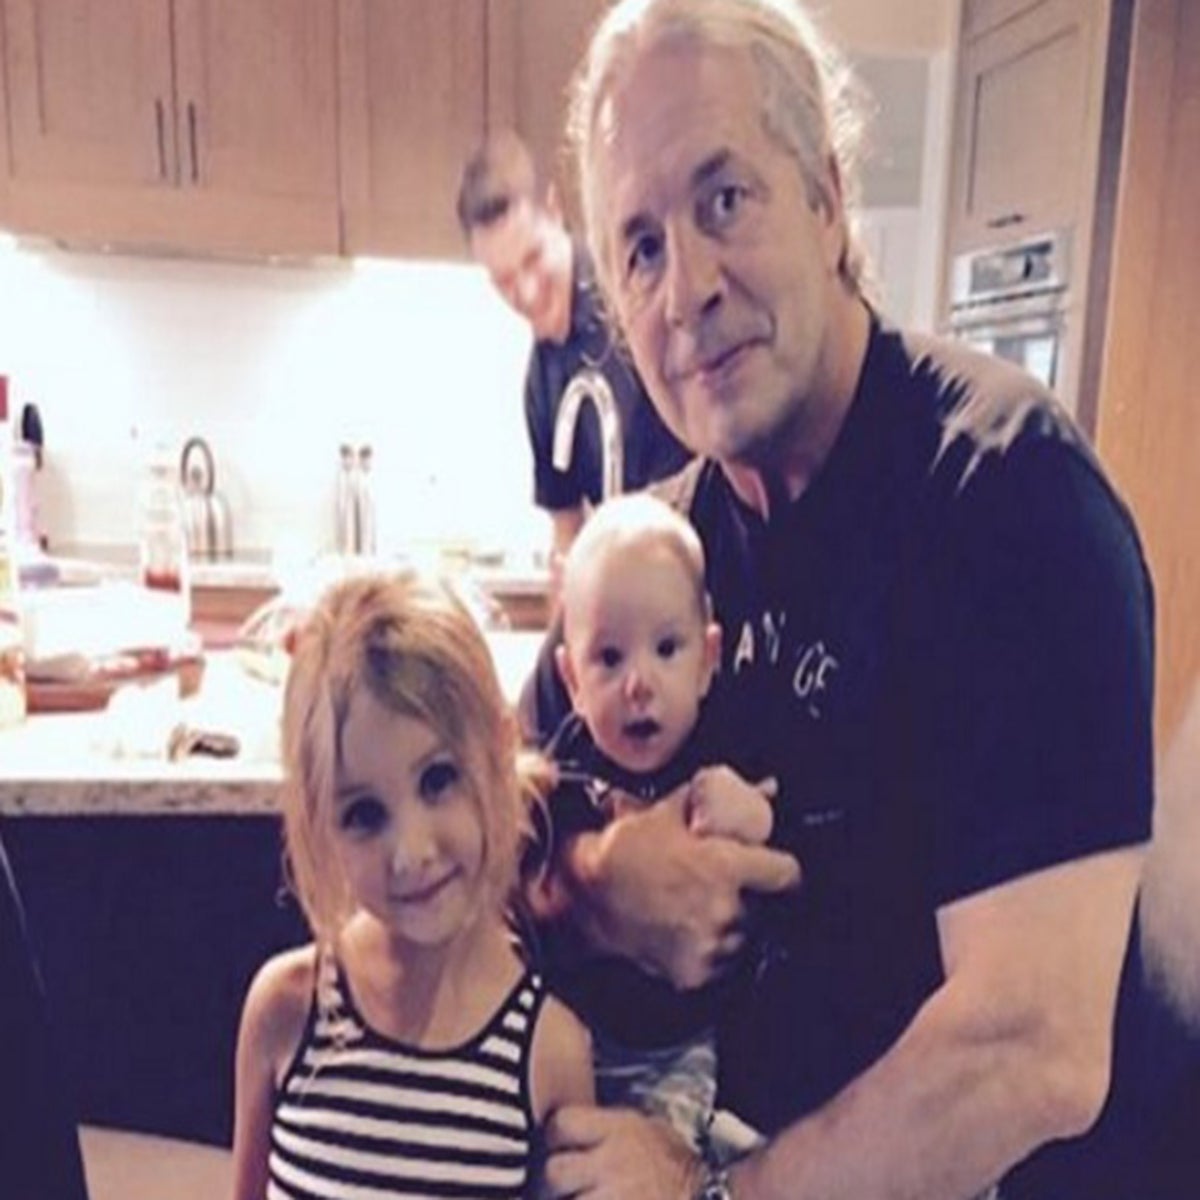 Bret Hart: Former WWE and WCW wrestler announces that he has prostate cancer, The Independent